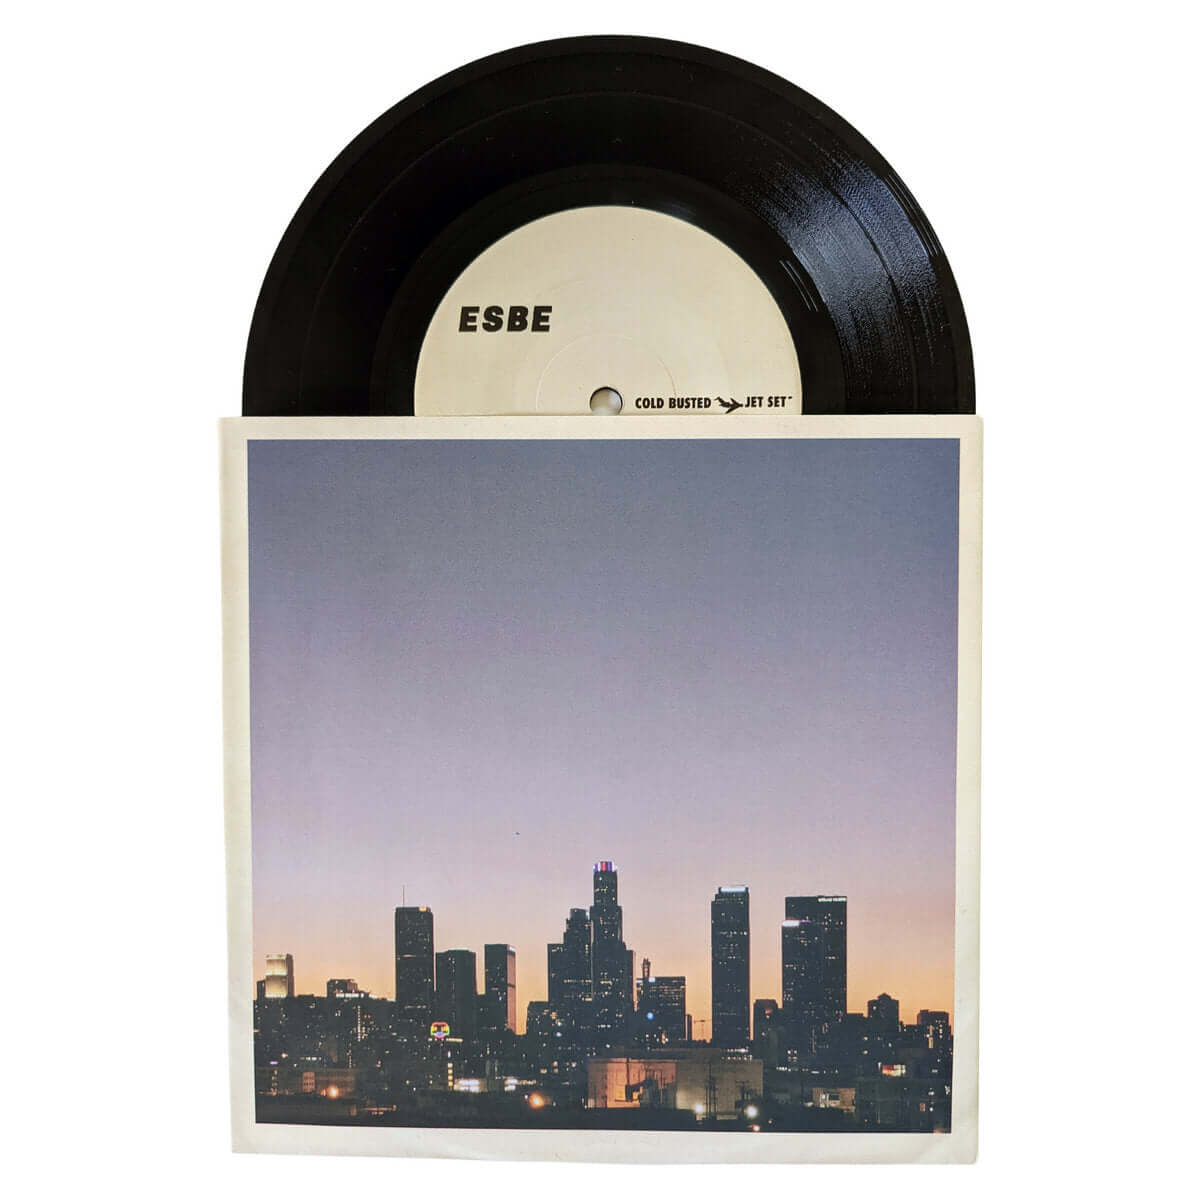 Esbe - Sunset Girl - Limited Edition 7 Inch Vinyl - Cold Busted